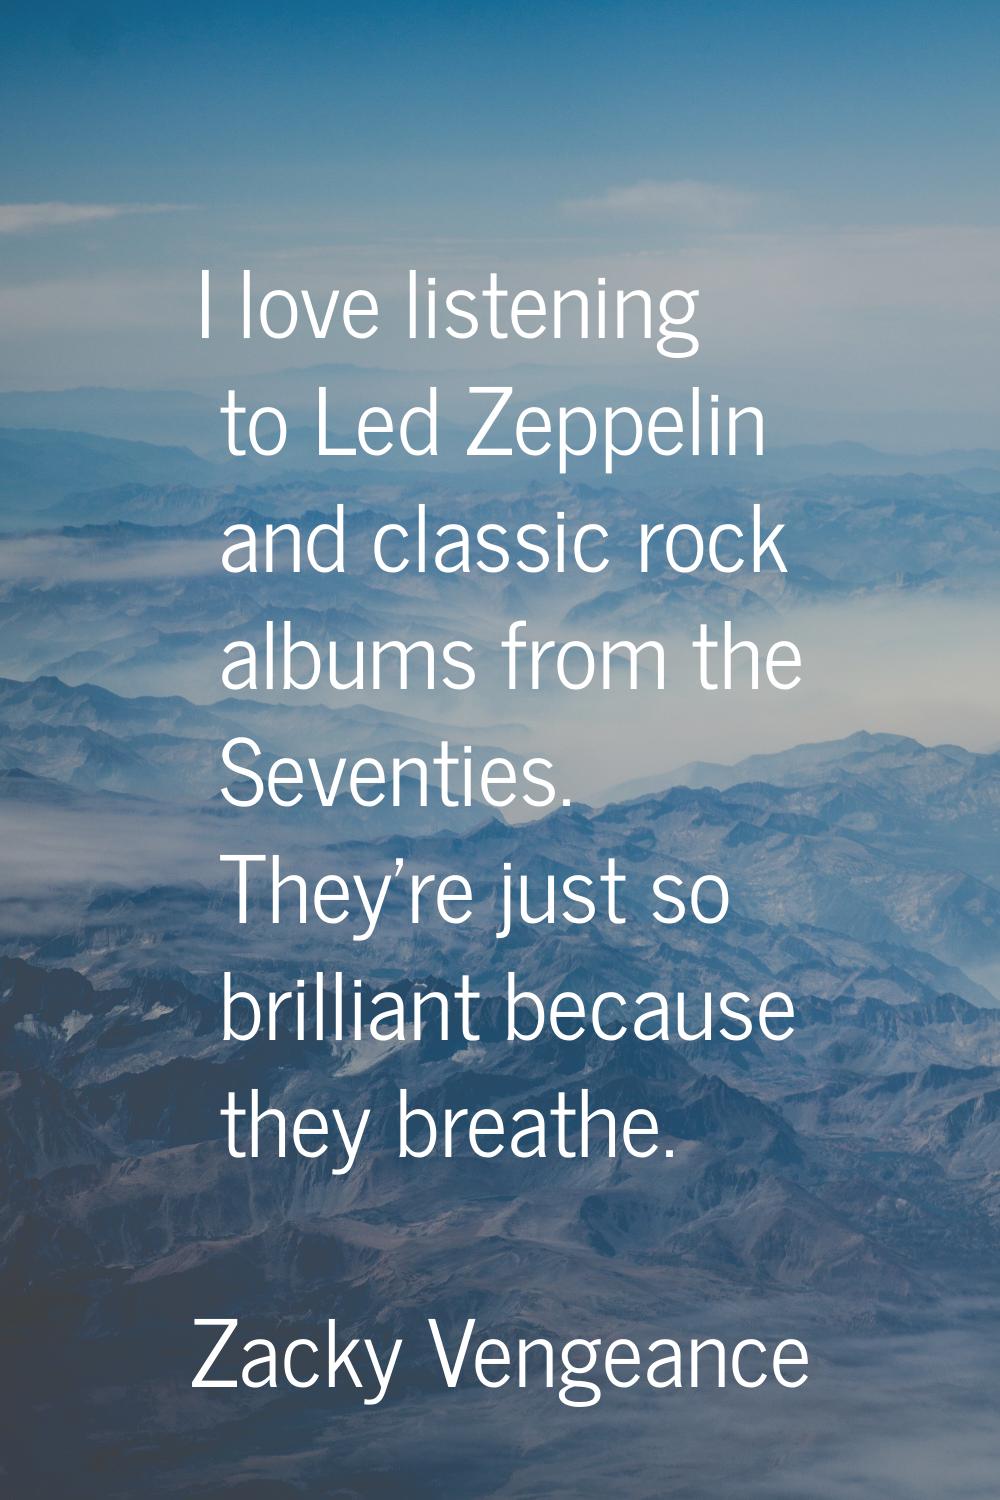 I love listening to Led Zeppelin and classic rock albums from the Seventies. They're just so brilli